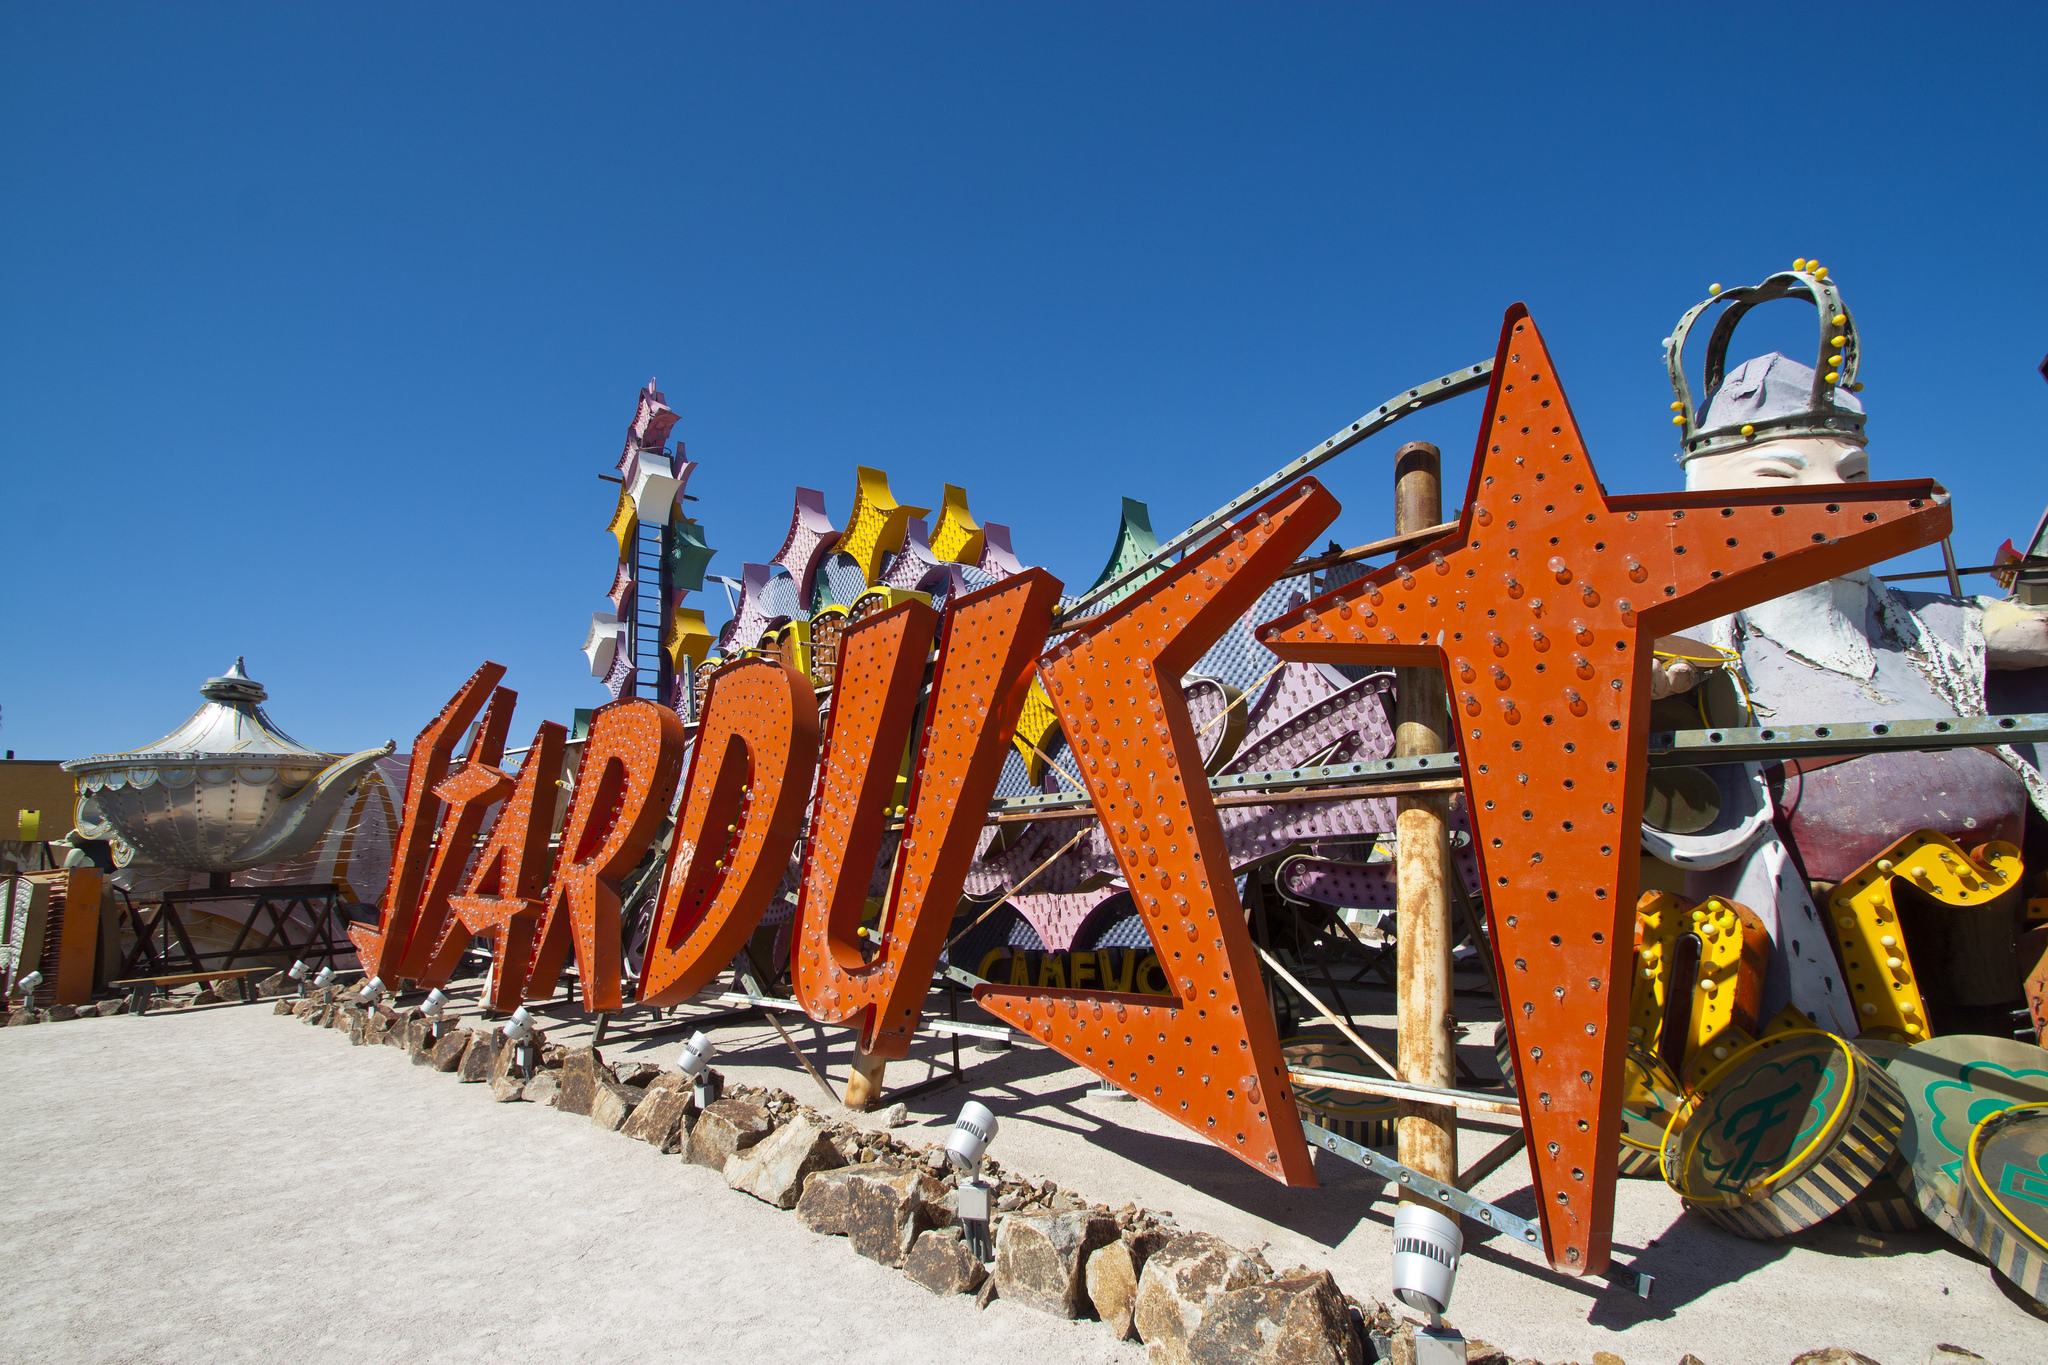 The Boneyard is a must visit when visiting Las Vegas ... photo by CC user gee01 on Flickr